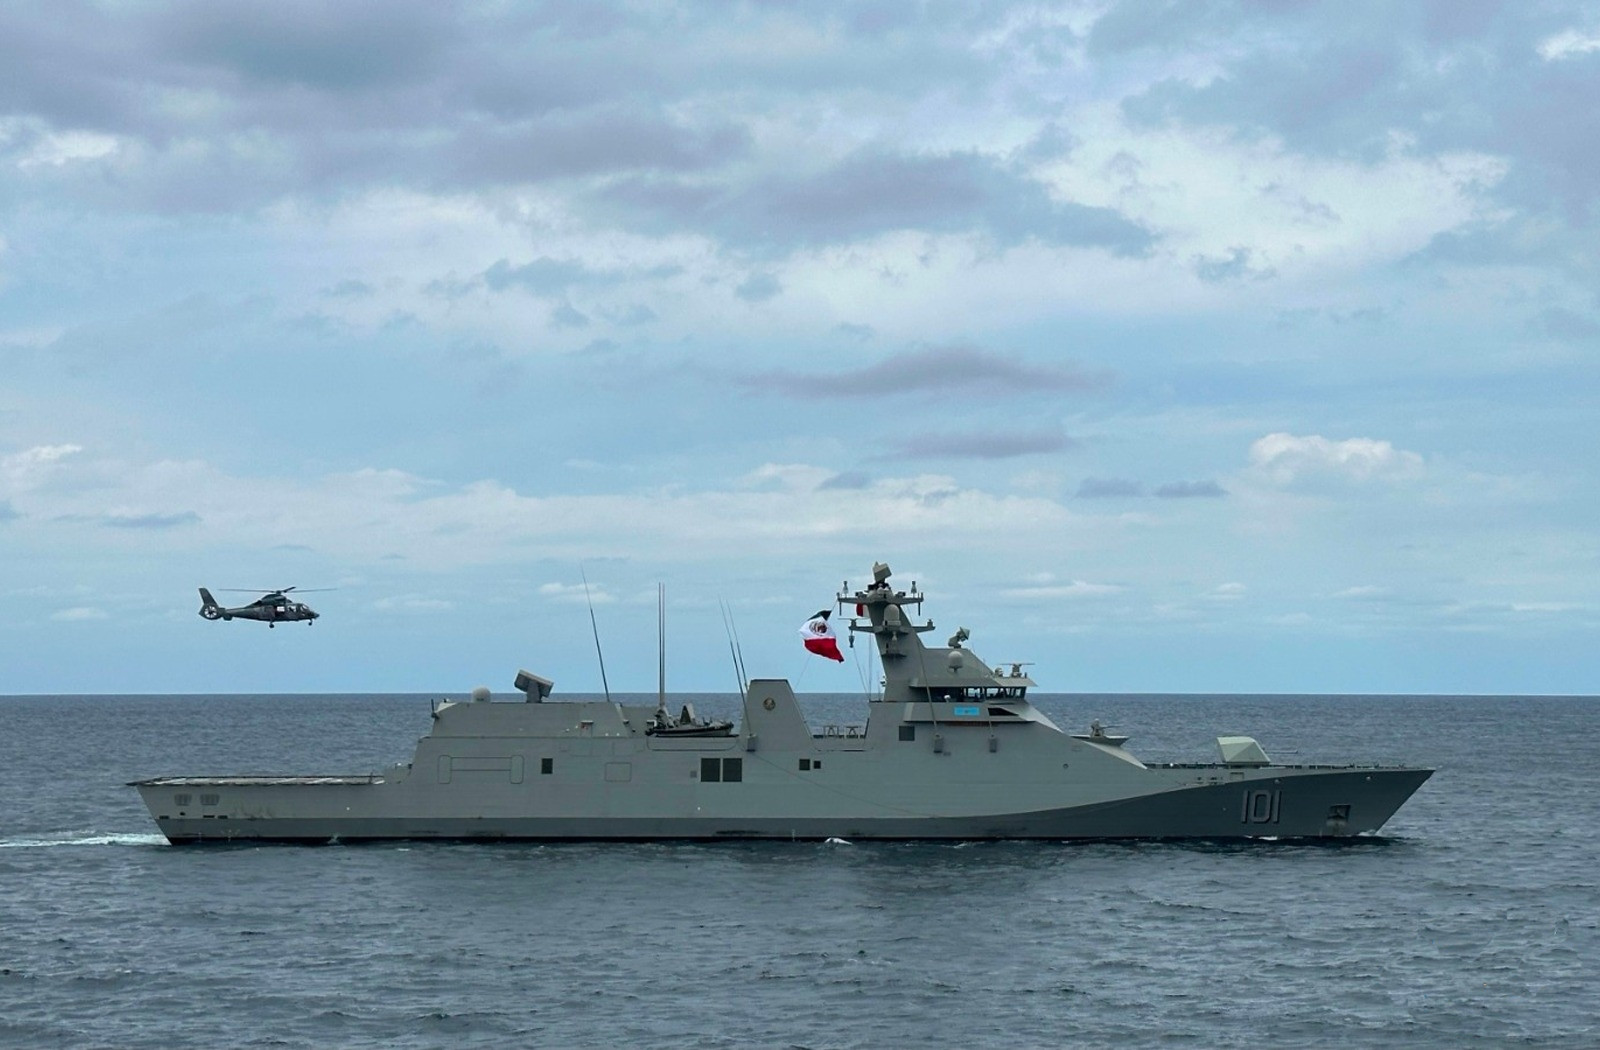 Mexico has developed the PASSEX exercise together with the French Navy